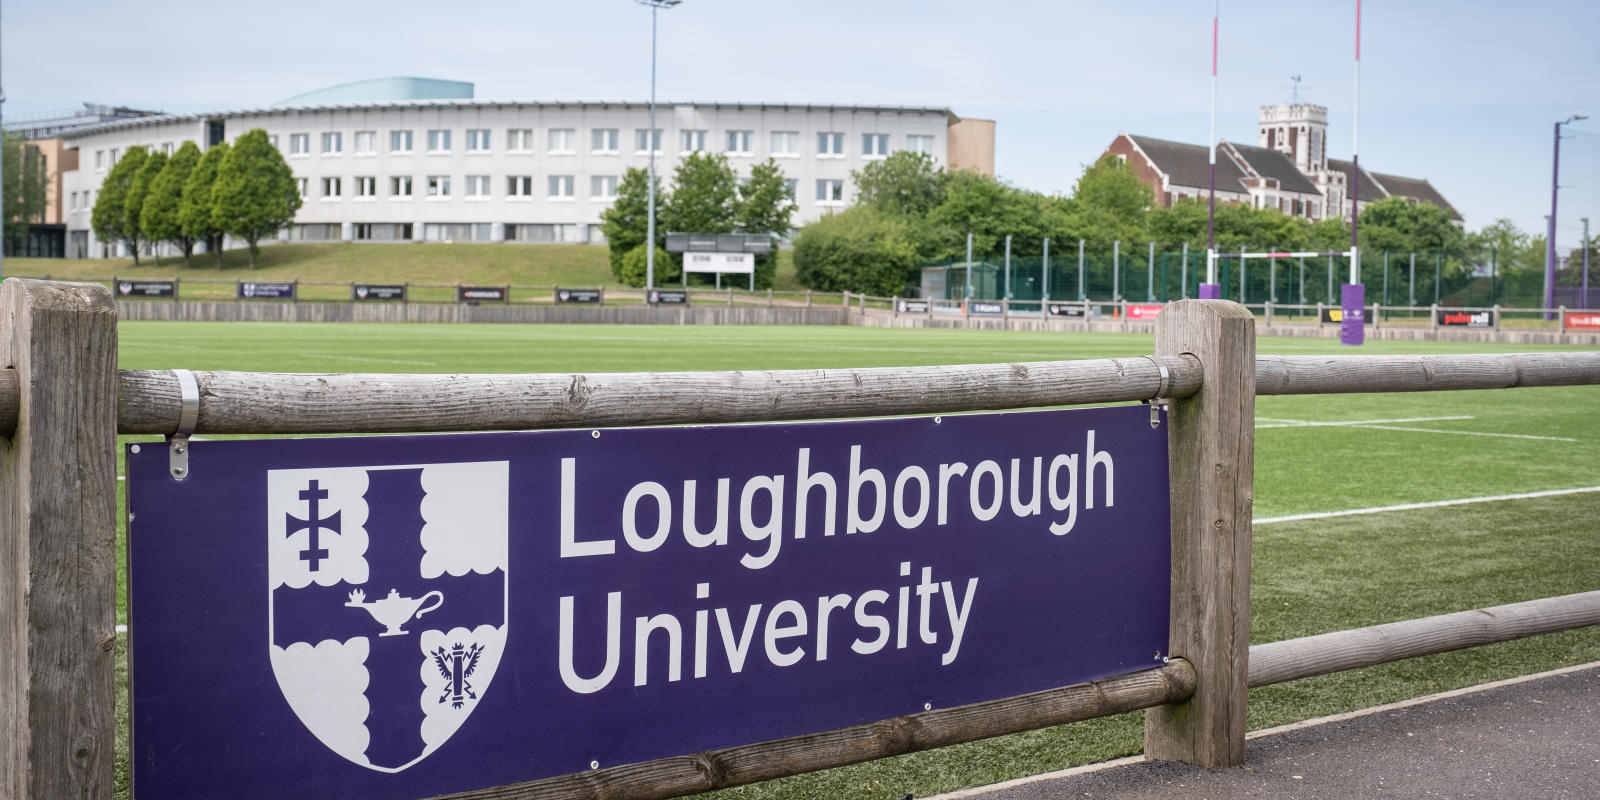 Rugby pitch with a Loughborough University banner in the foreground